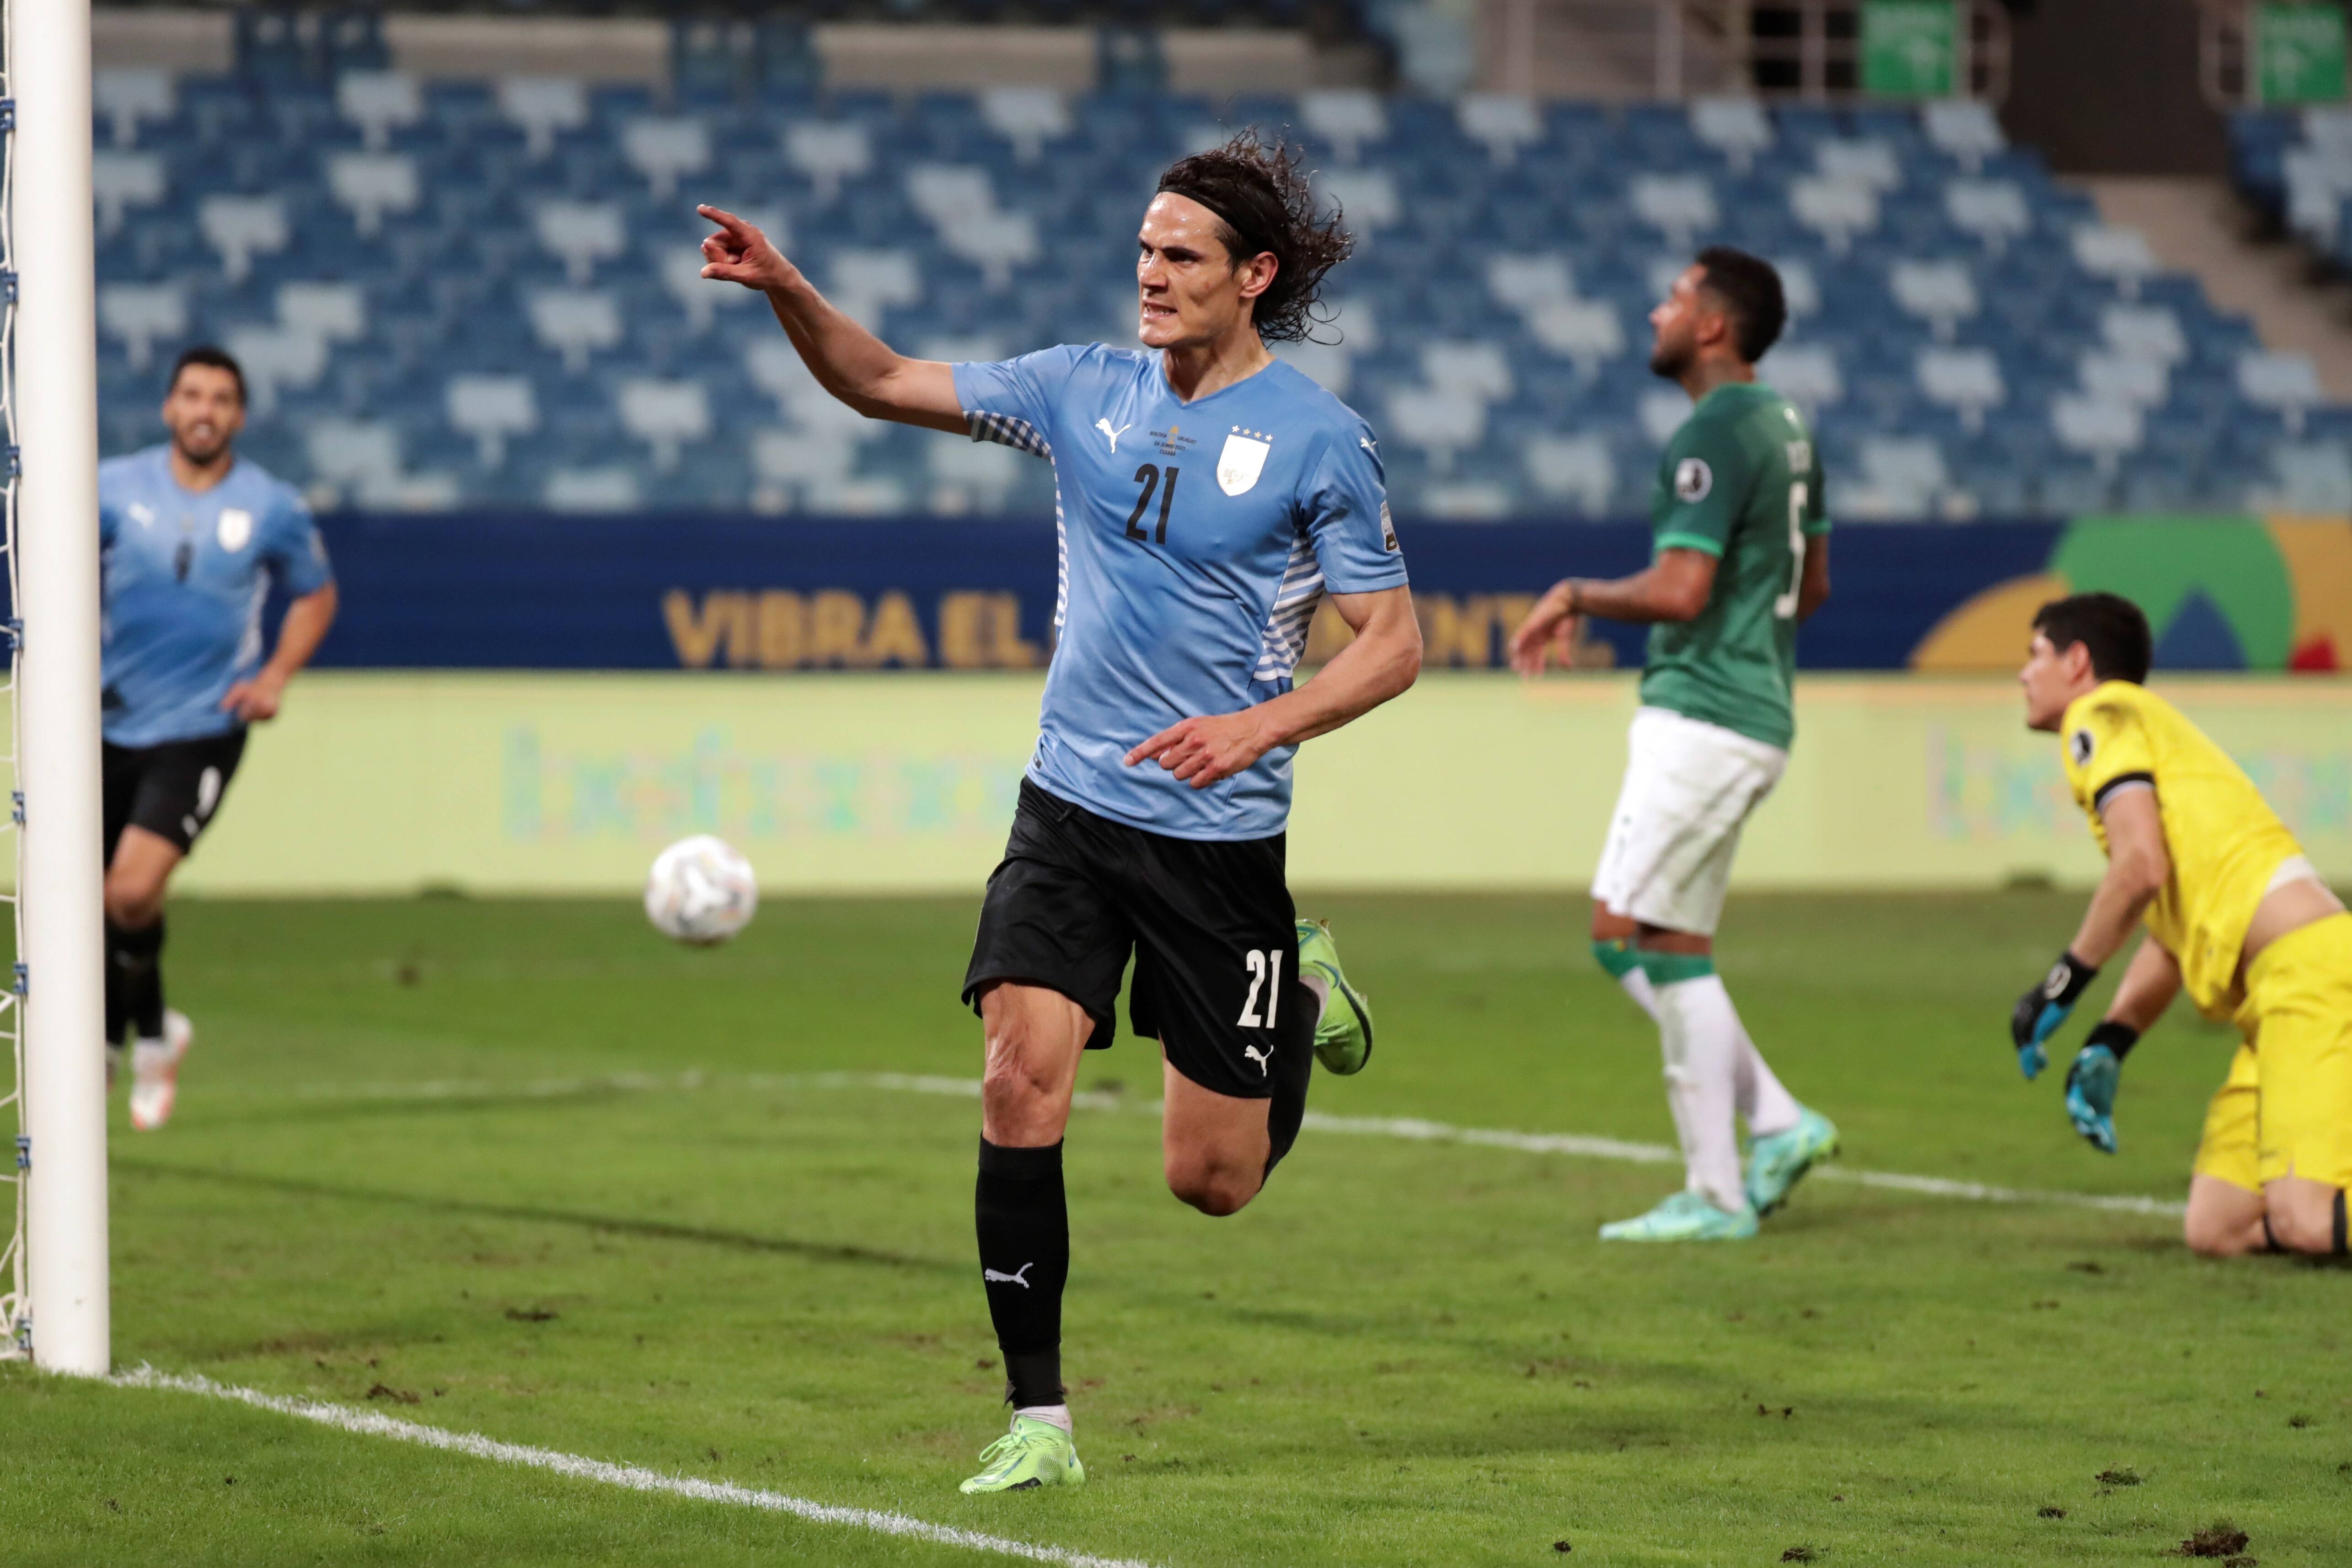 Uruguay S Edinson Cavani Celebrates A Goal Today Against Bolivia, During A Match For Group A Of The Copa America At The